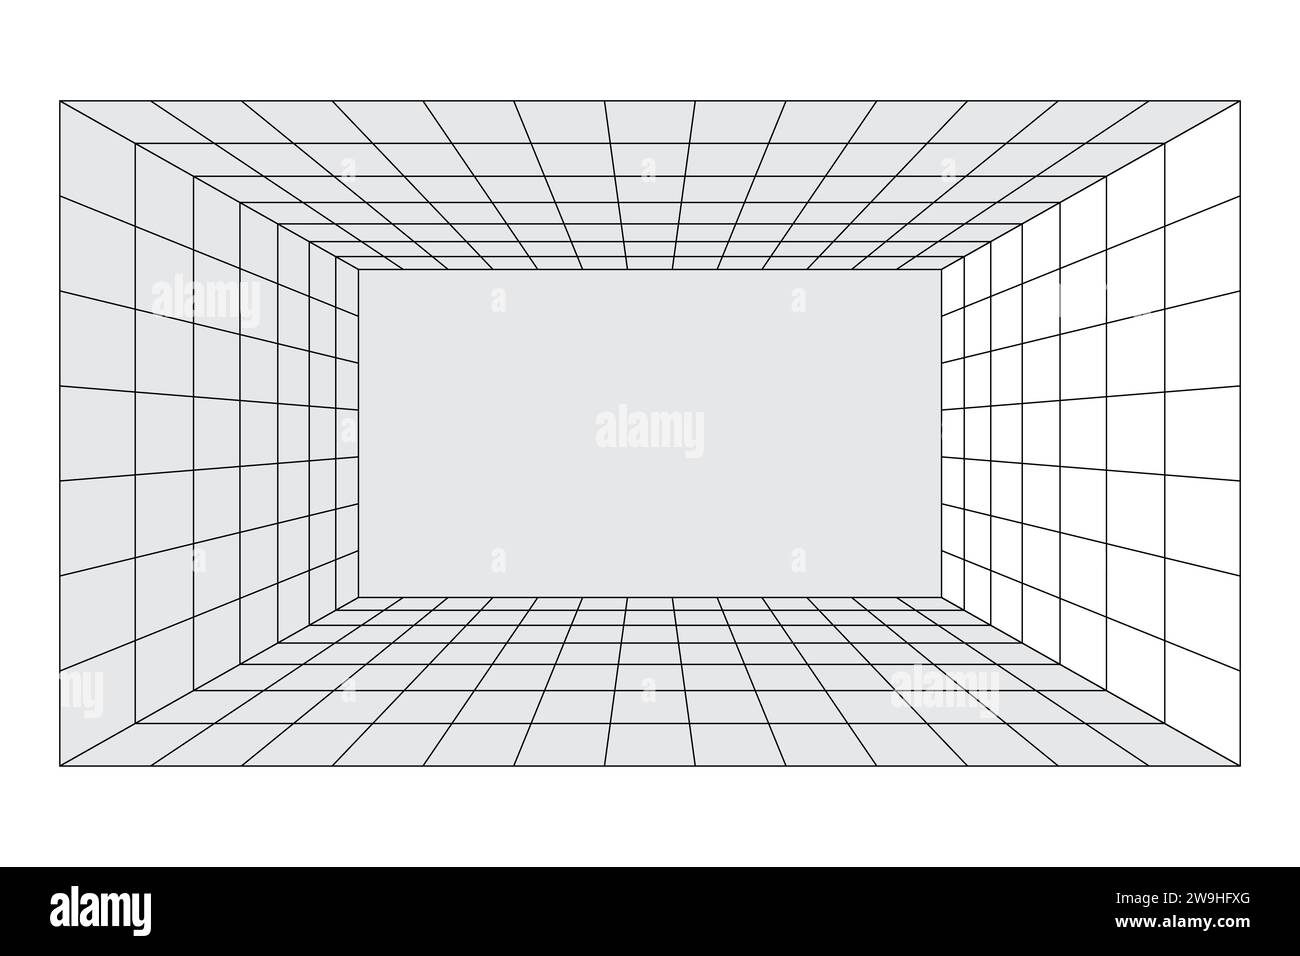 Perspective grid room background vector illustration. Stock Vector